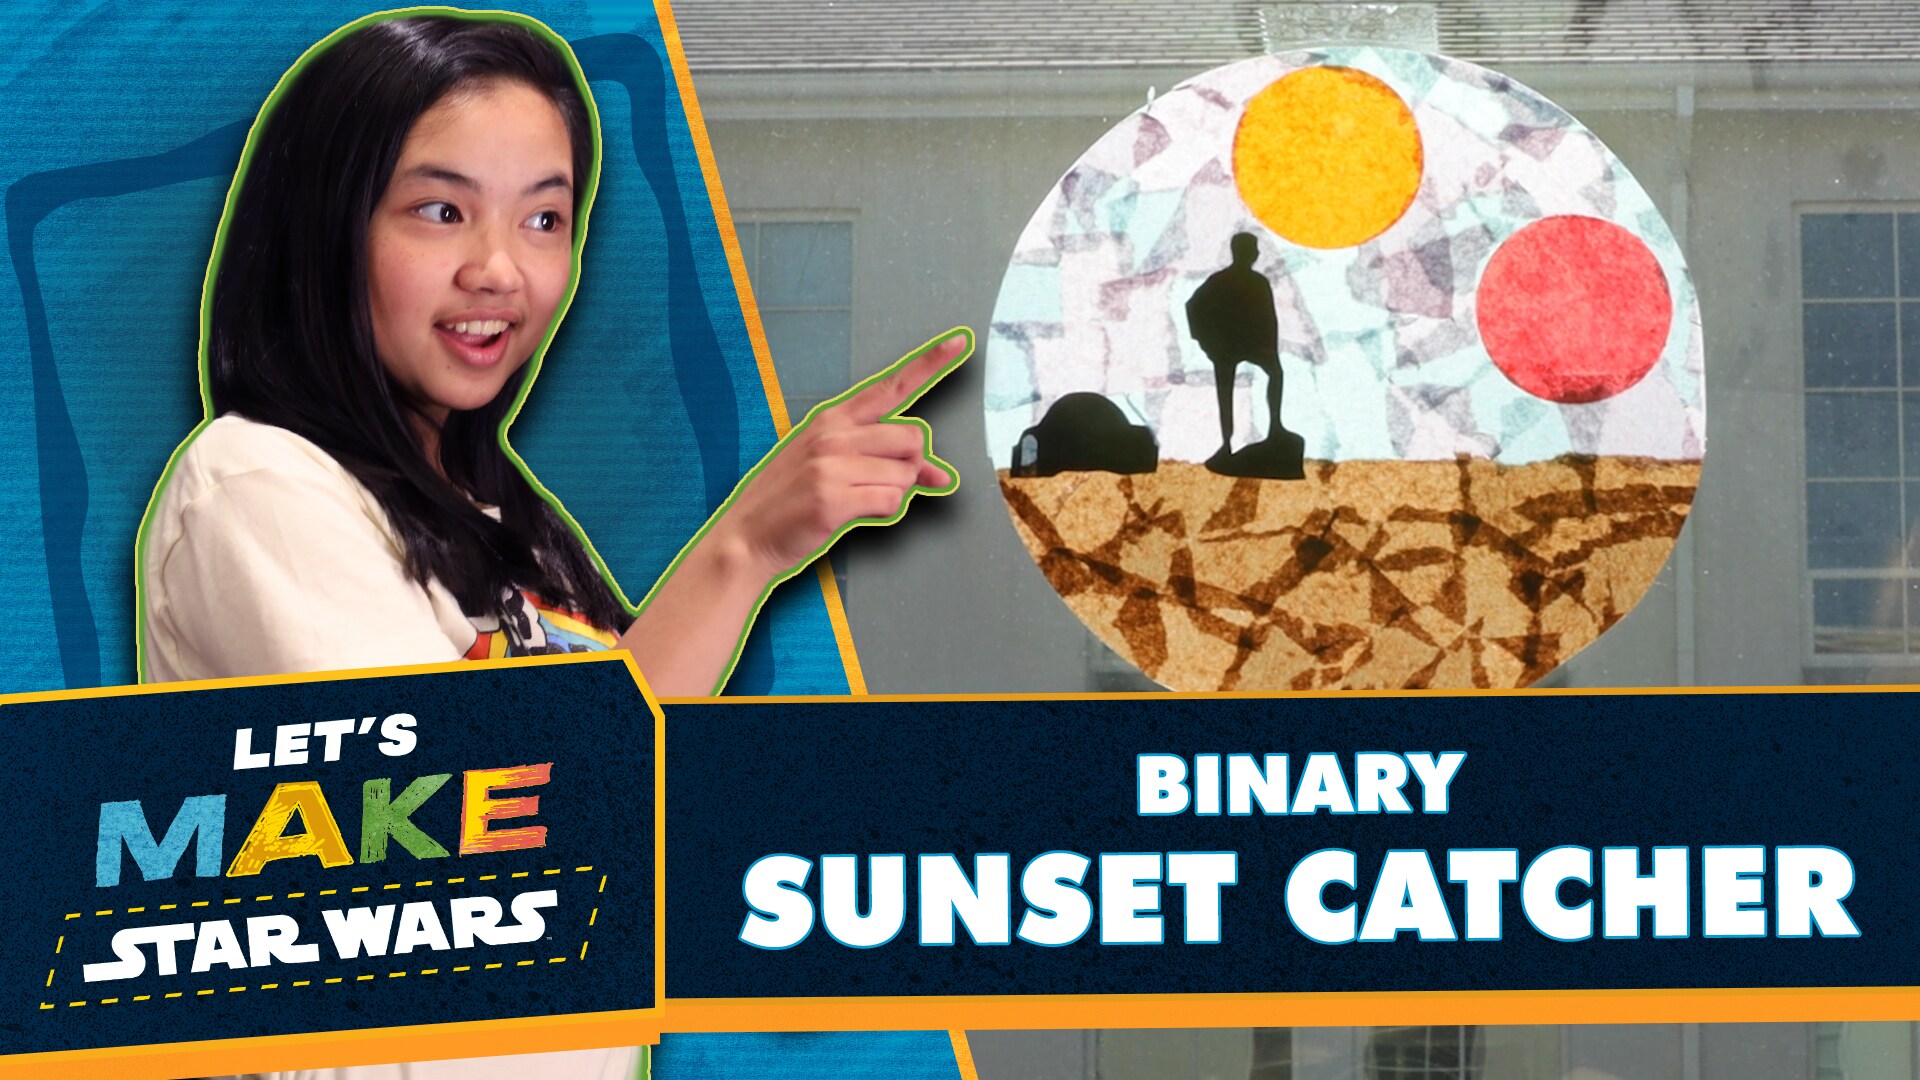 Let's Make Star Wars - How to Make a Binary Sunset Catcher